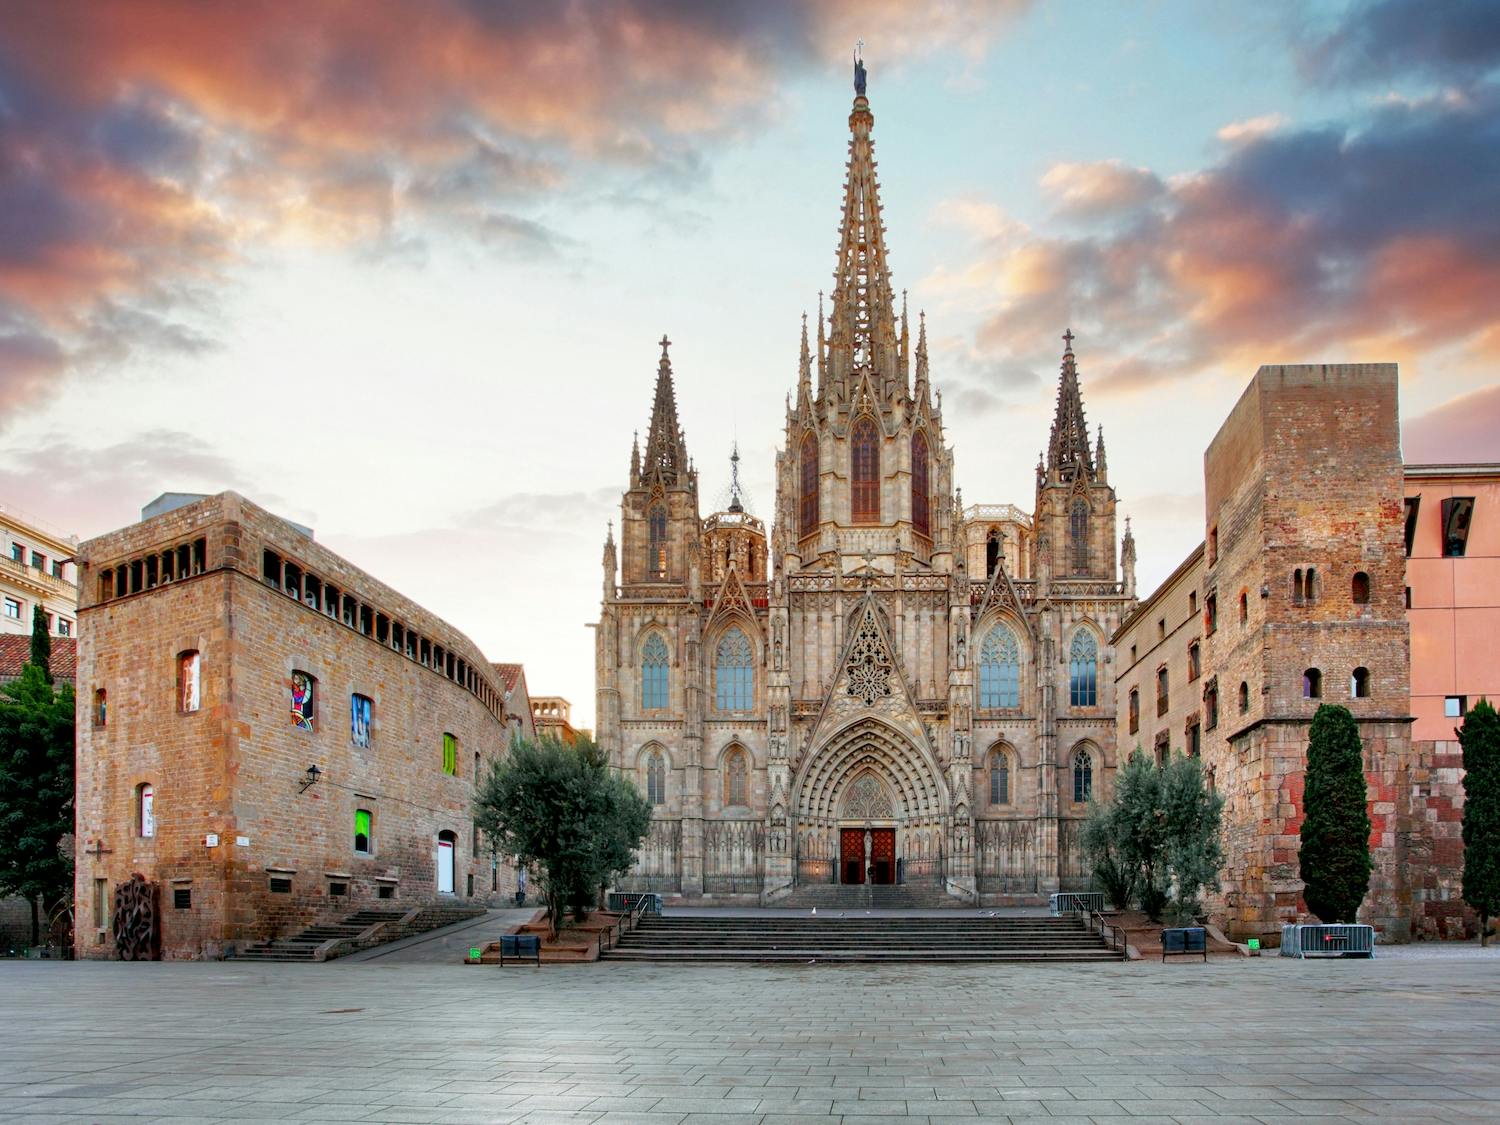 Barcelona's Gothic quarter self-guided walking tour